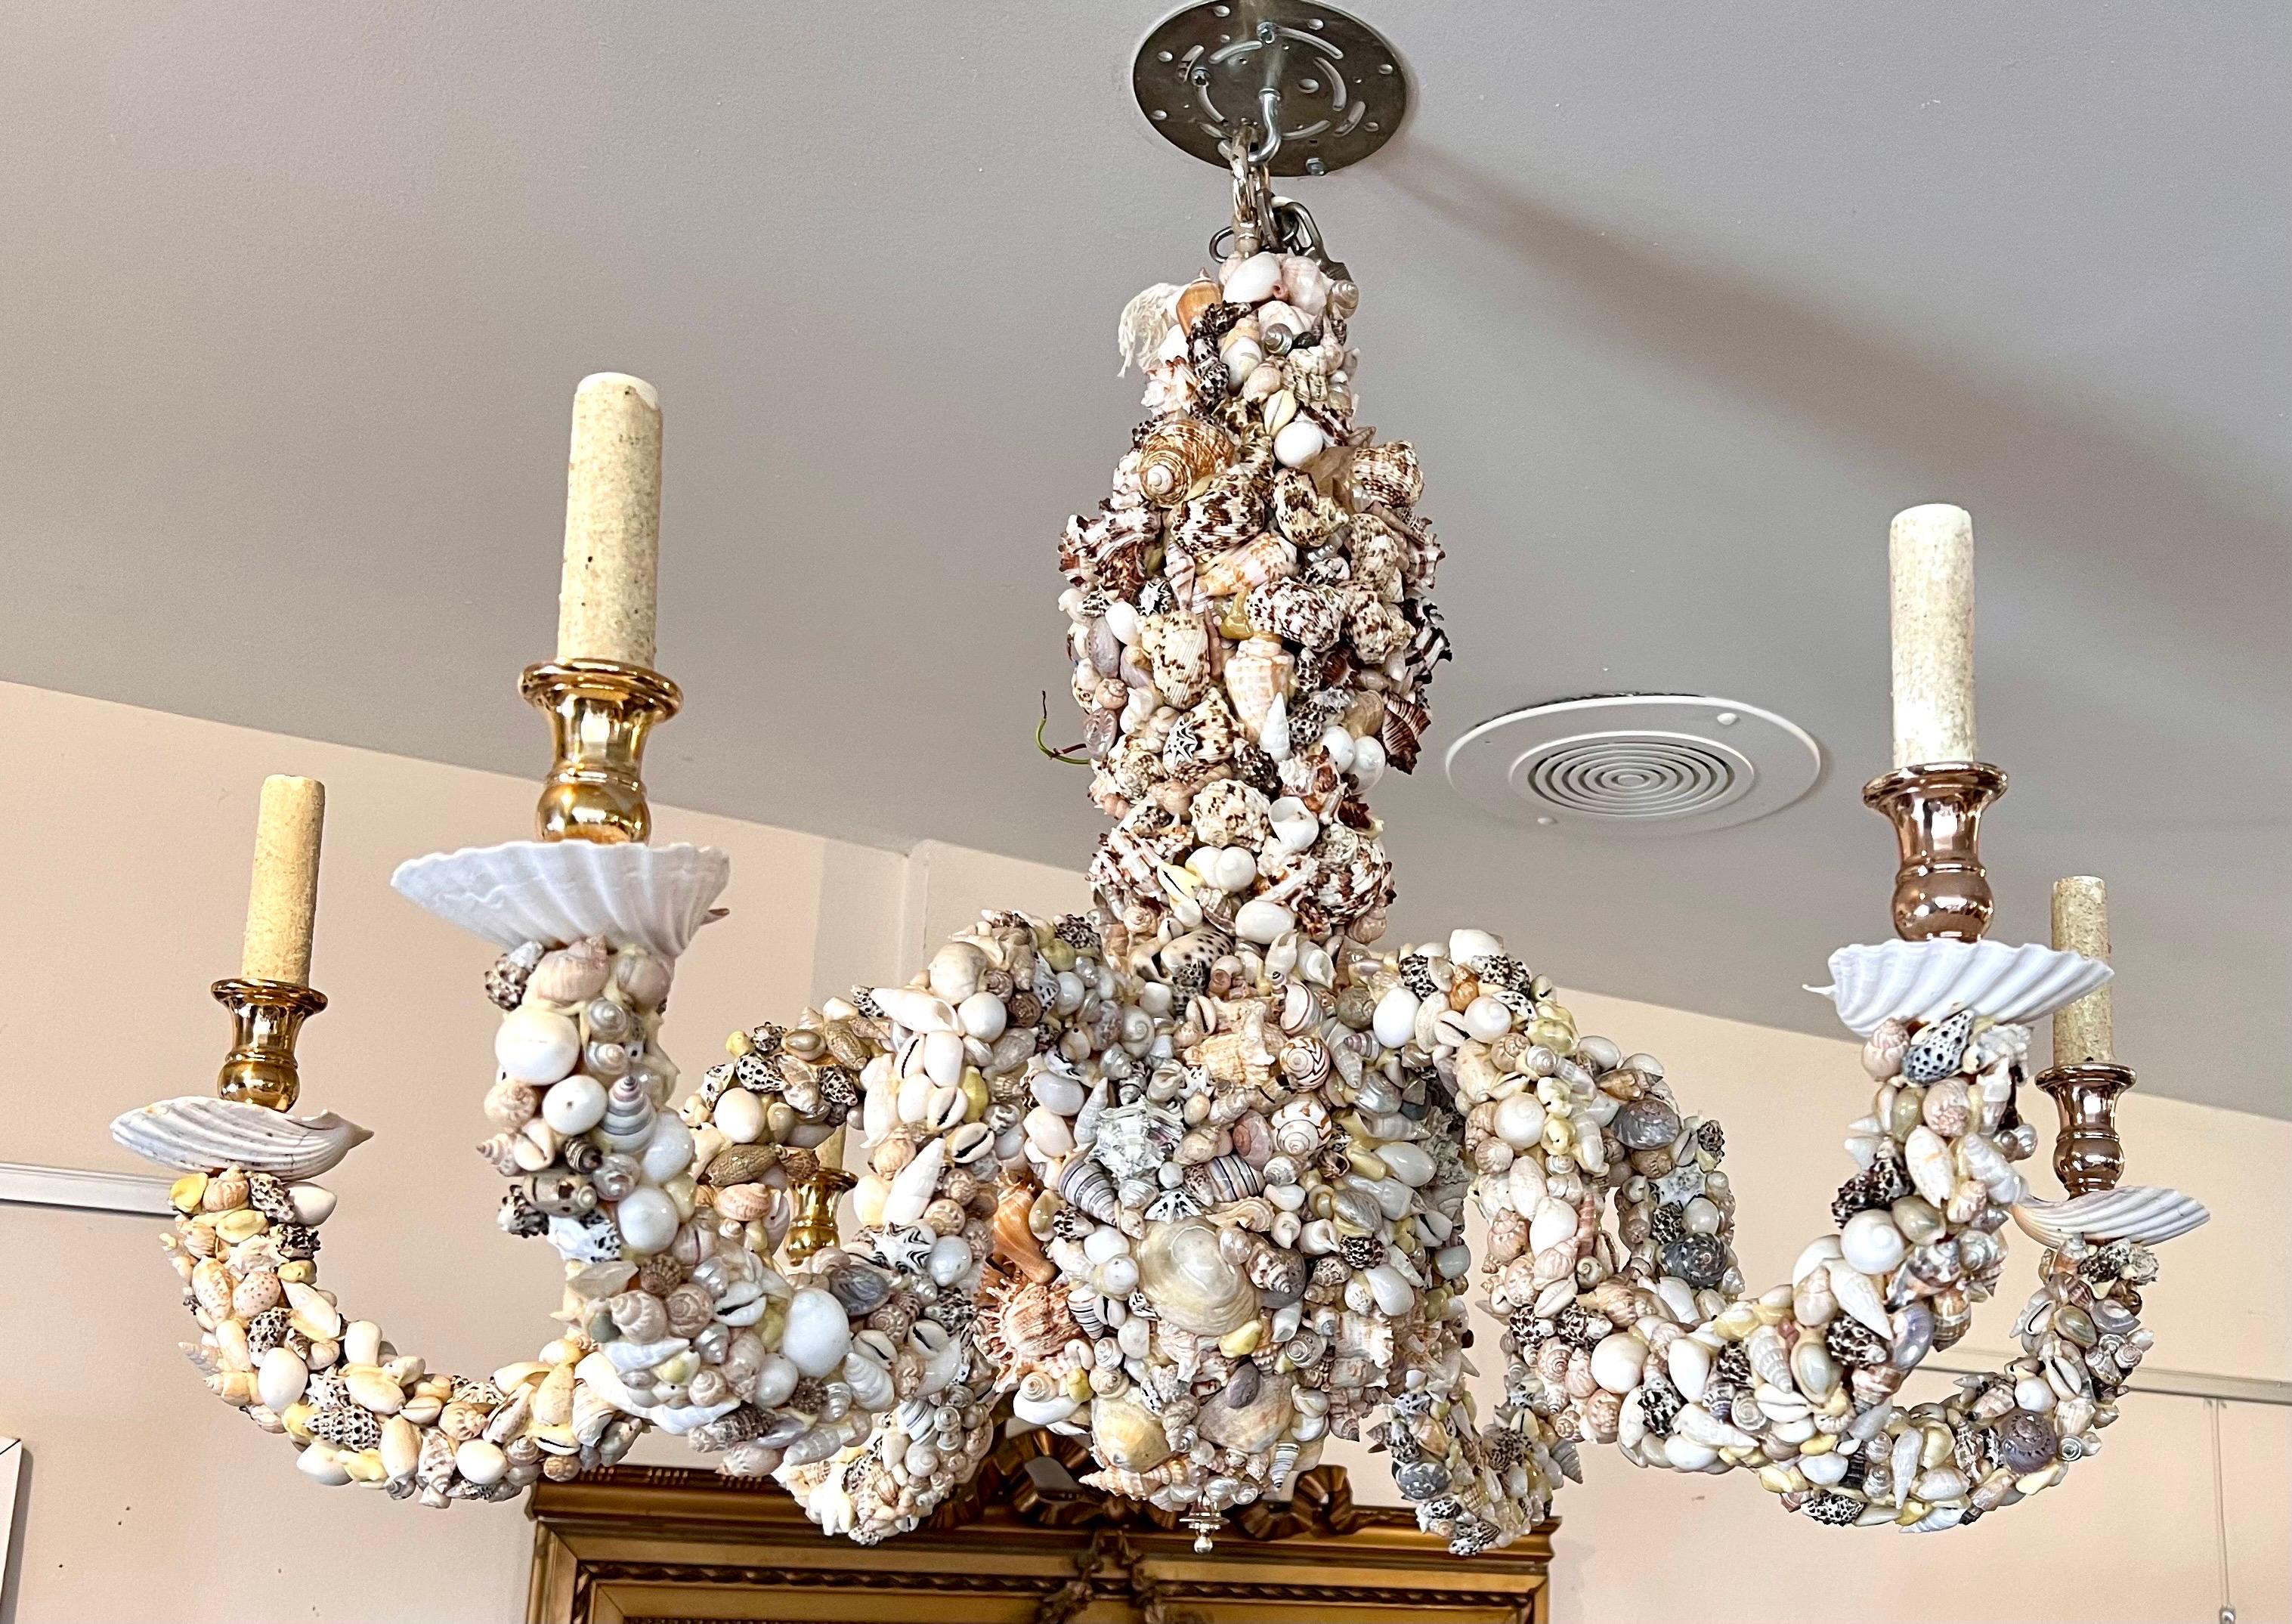 The Seashell Chandelier is not only a stunning lighting fixture but a true work of art. This unique one-of-kind seashell 6 arm chandelier is beautifully adorned with various sizes. Every seashell on this magnificent chandelier has been carefully